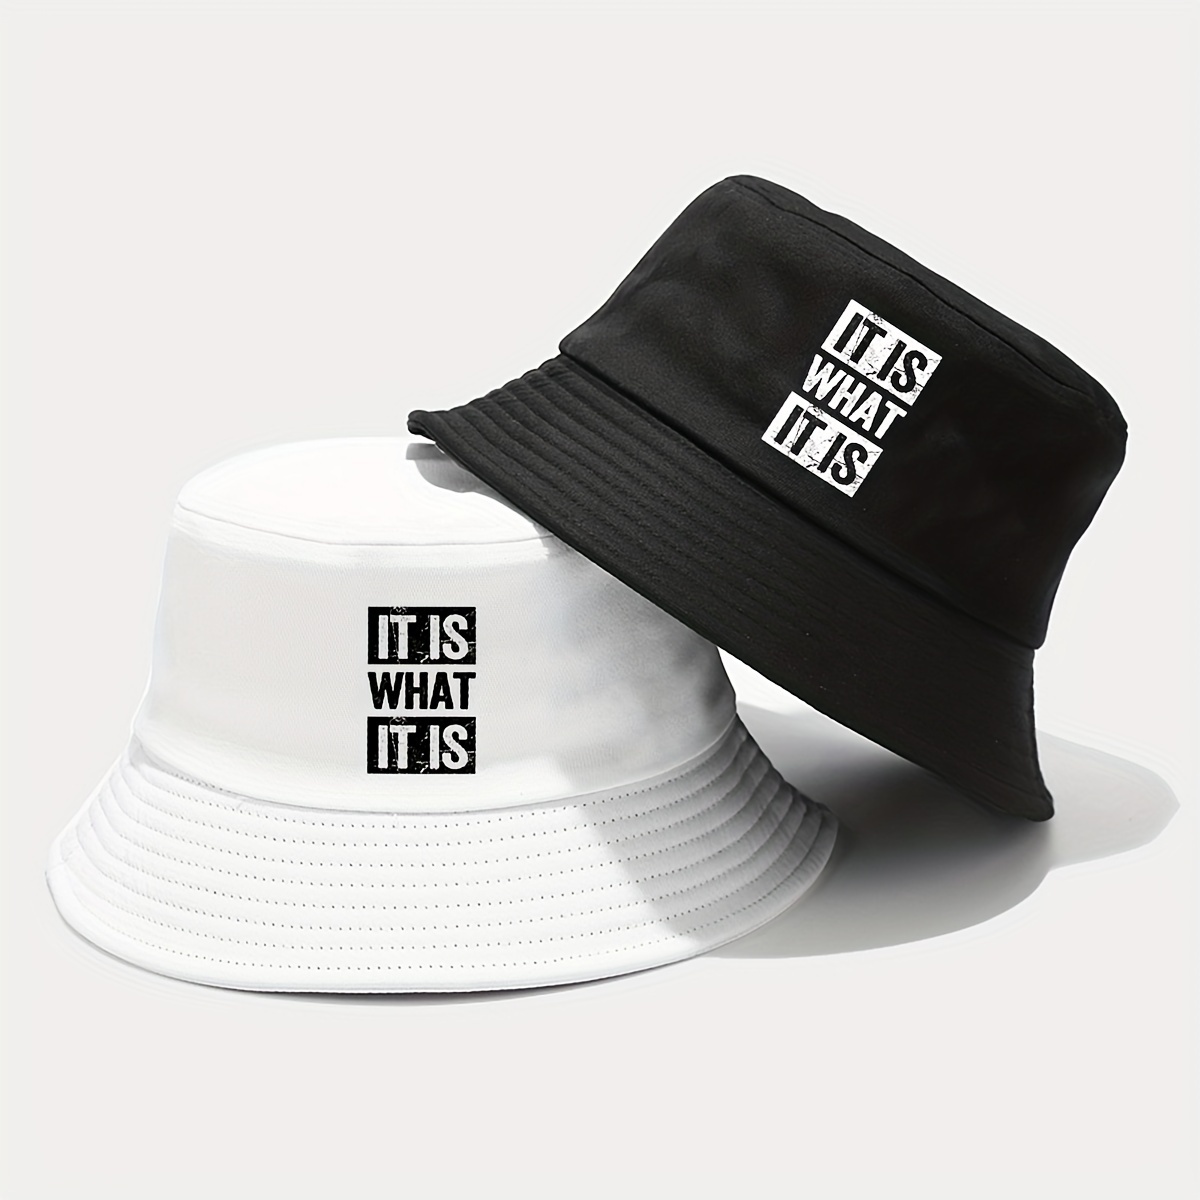 

Unisex "it Is What It Is" Print Bucket Hat, Breathable & Foldable Sun Protection Basin Cap, Ideal For Spring & Summer Outdoor Activities And Travel